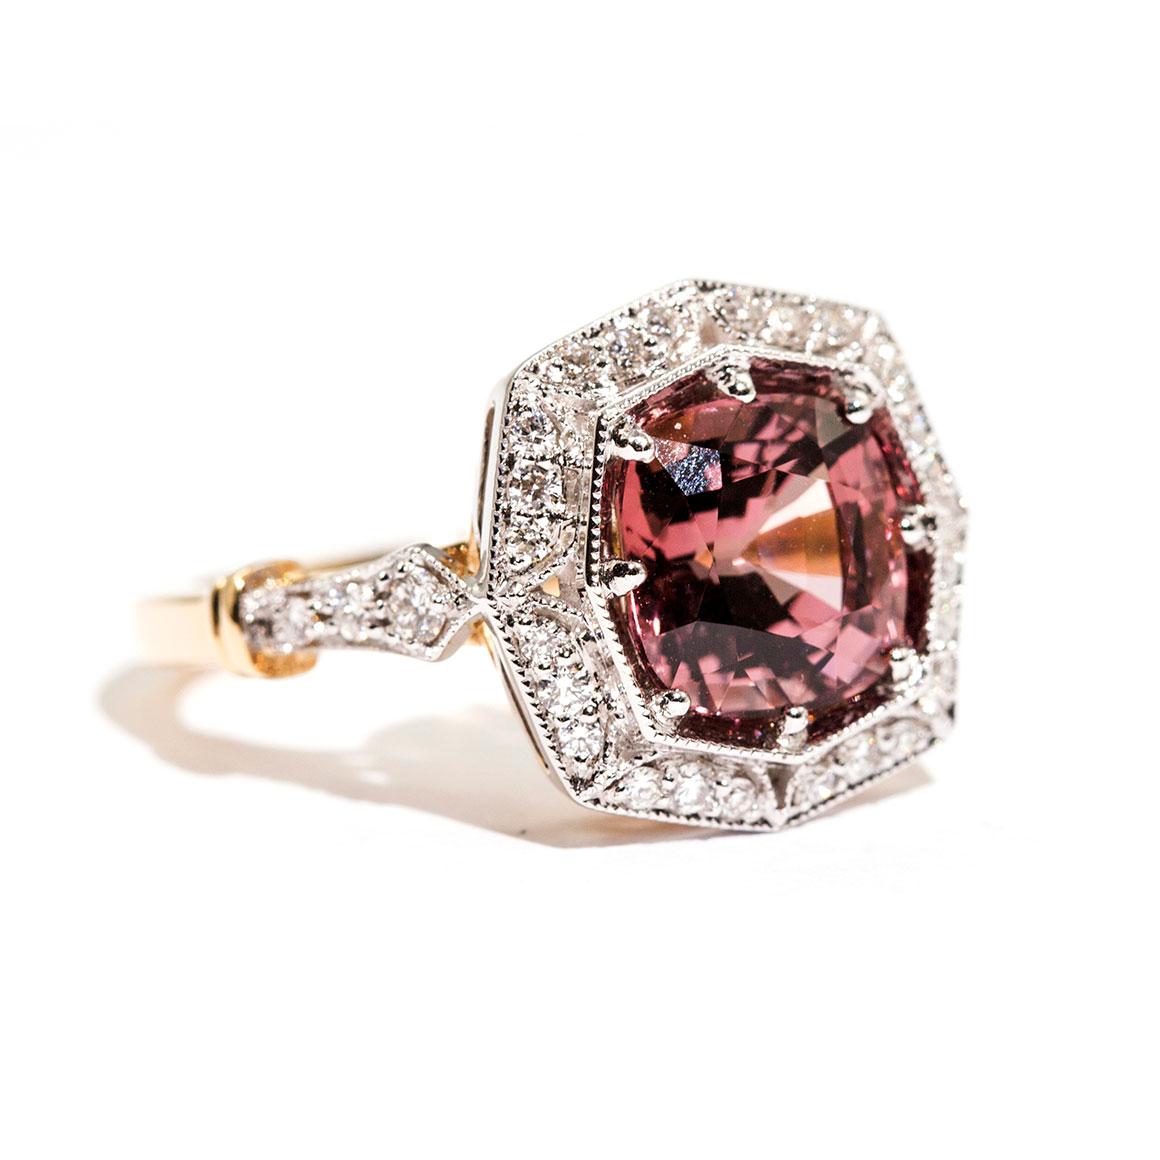 3.16 Carat Cushion Cut Red Pink Spinel and Diamond 18 Carat Gold Halo Ring 7